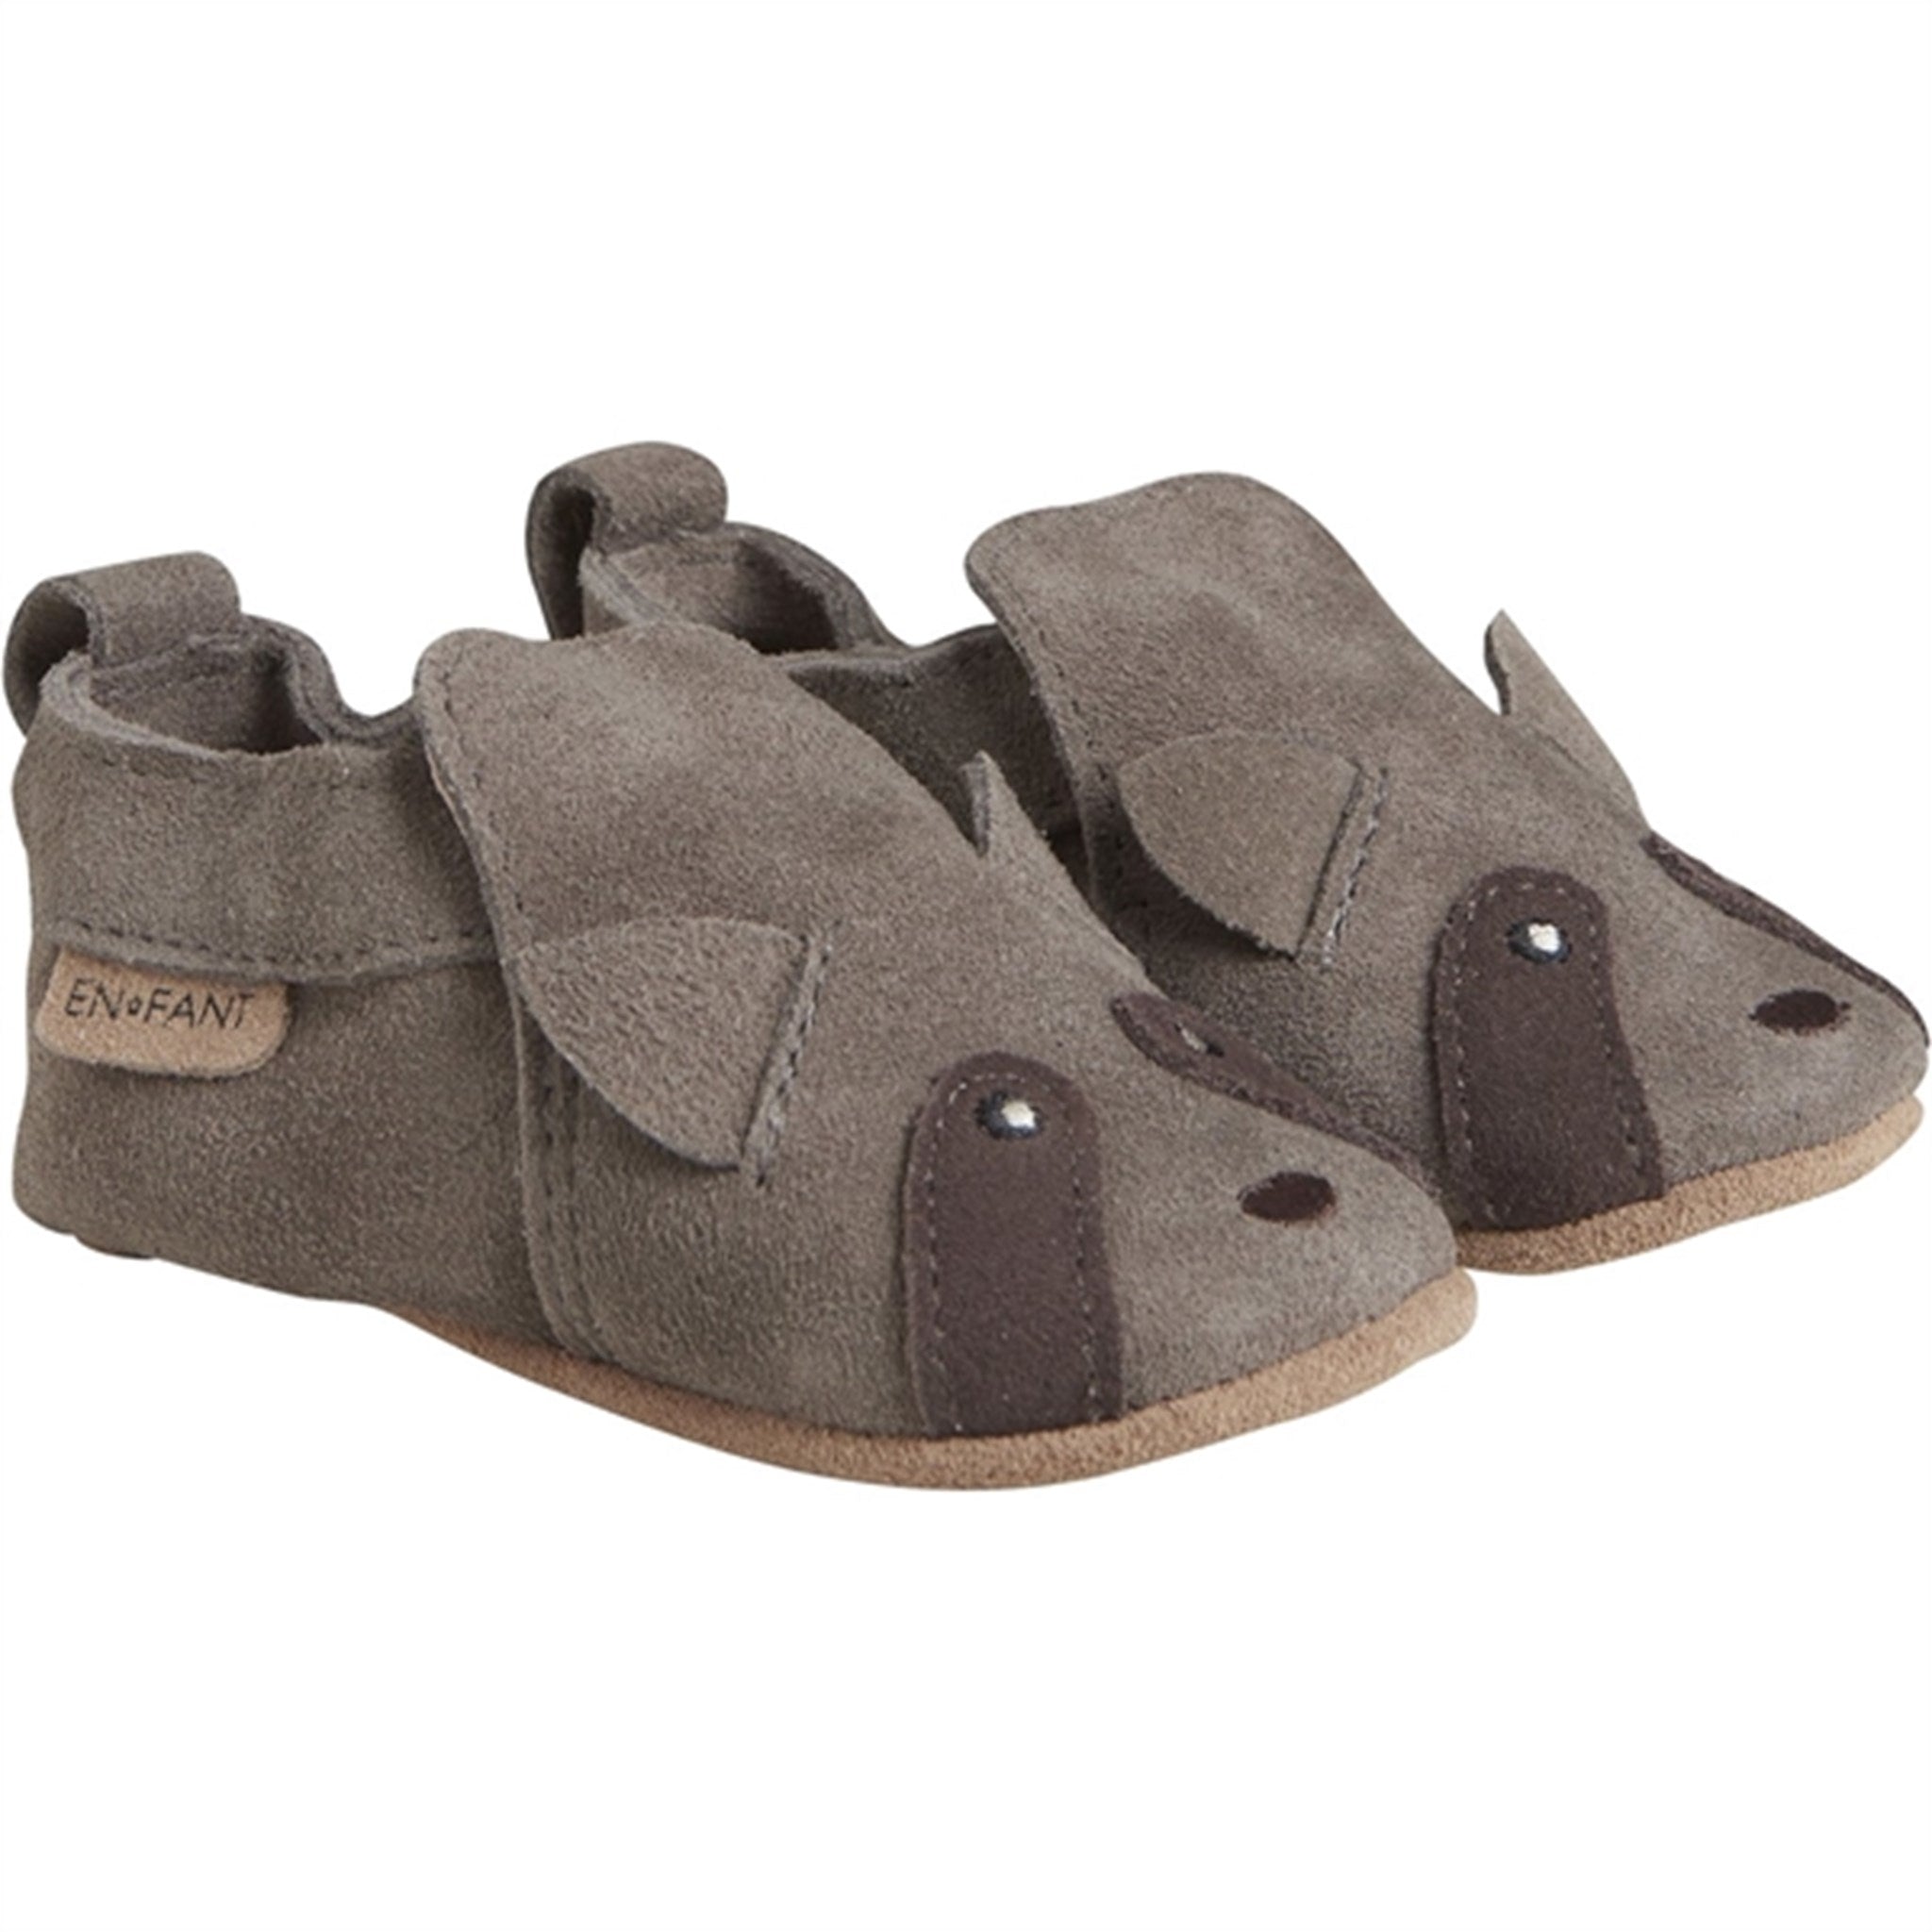 En Fant Slippers Ruskind Chocolate Chip